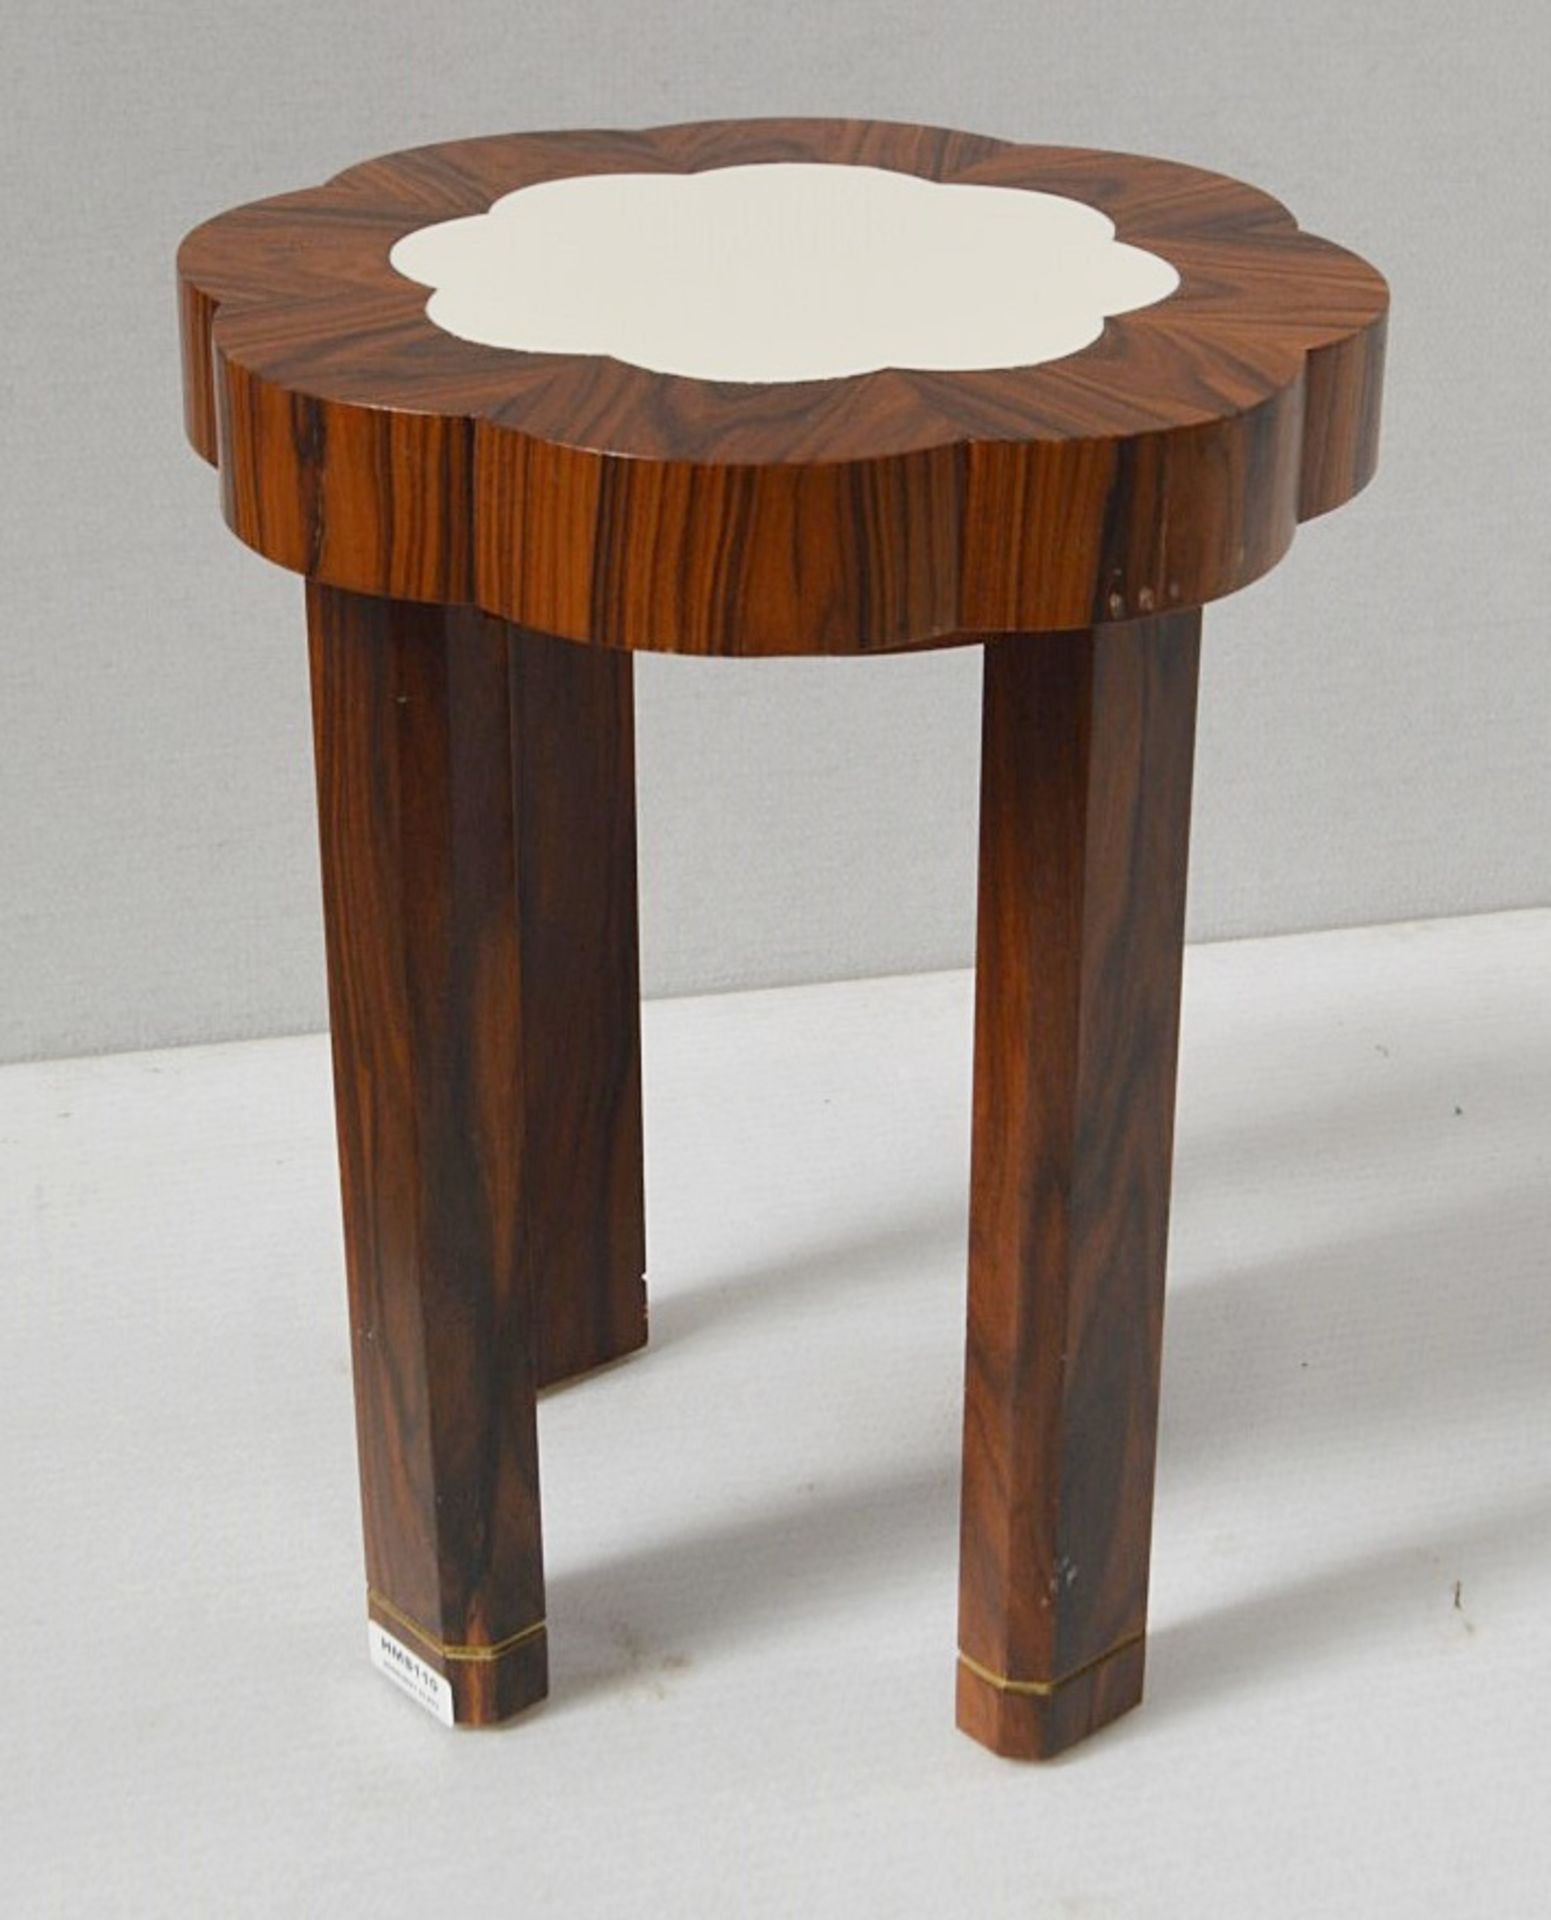 1 x Moroccan-style Solid Wood Side Table With Stone Inlay And Glass Top - Dimensions: Height - Image 2 of 3